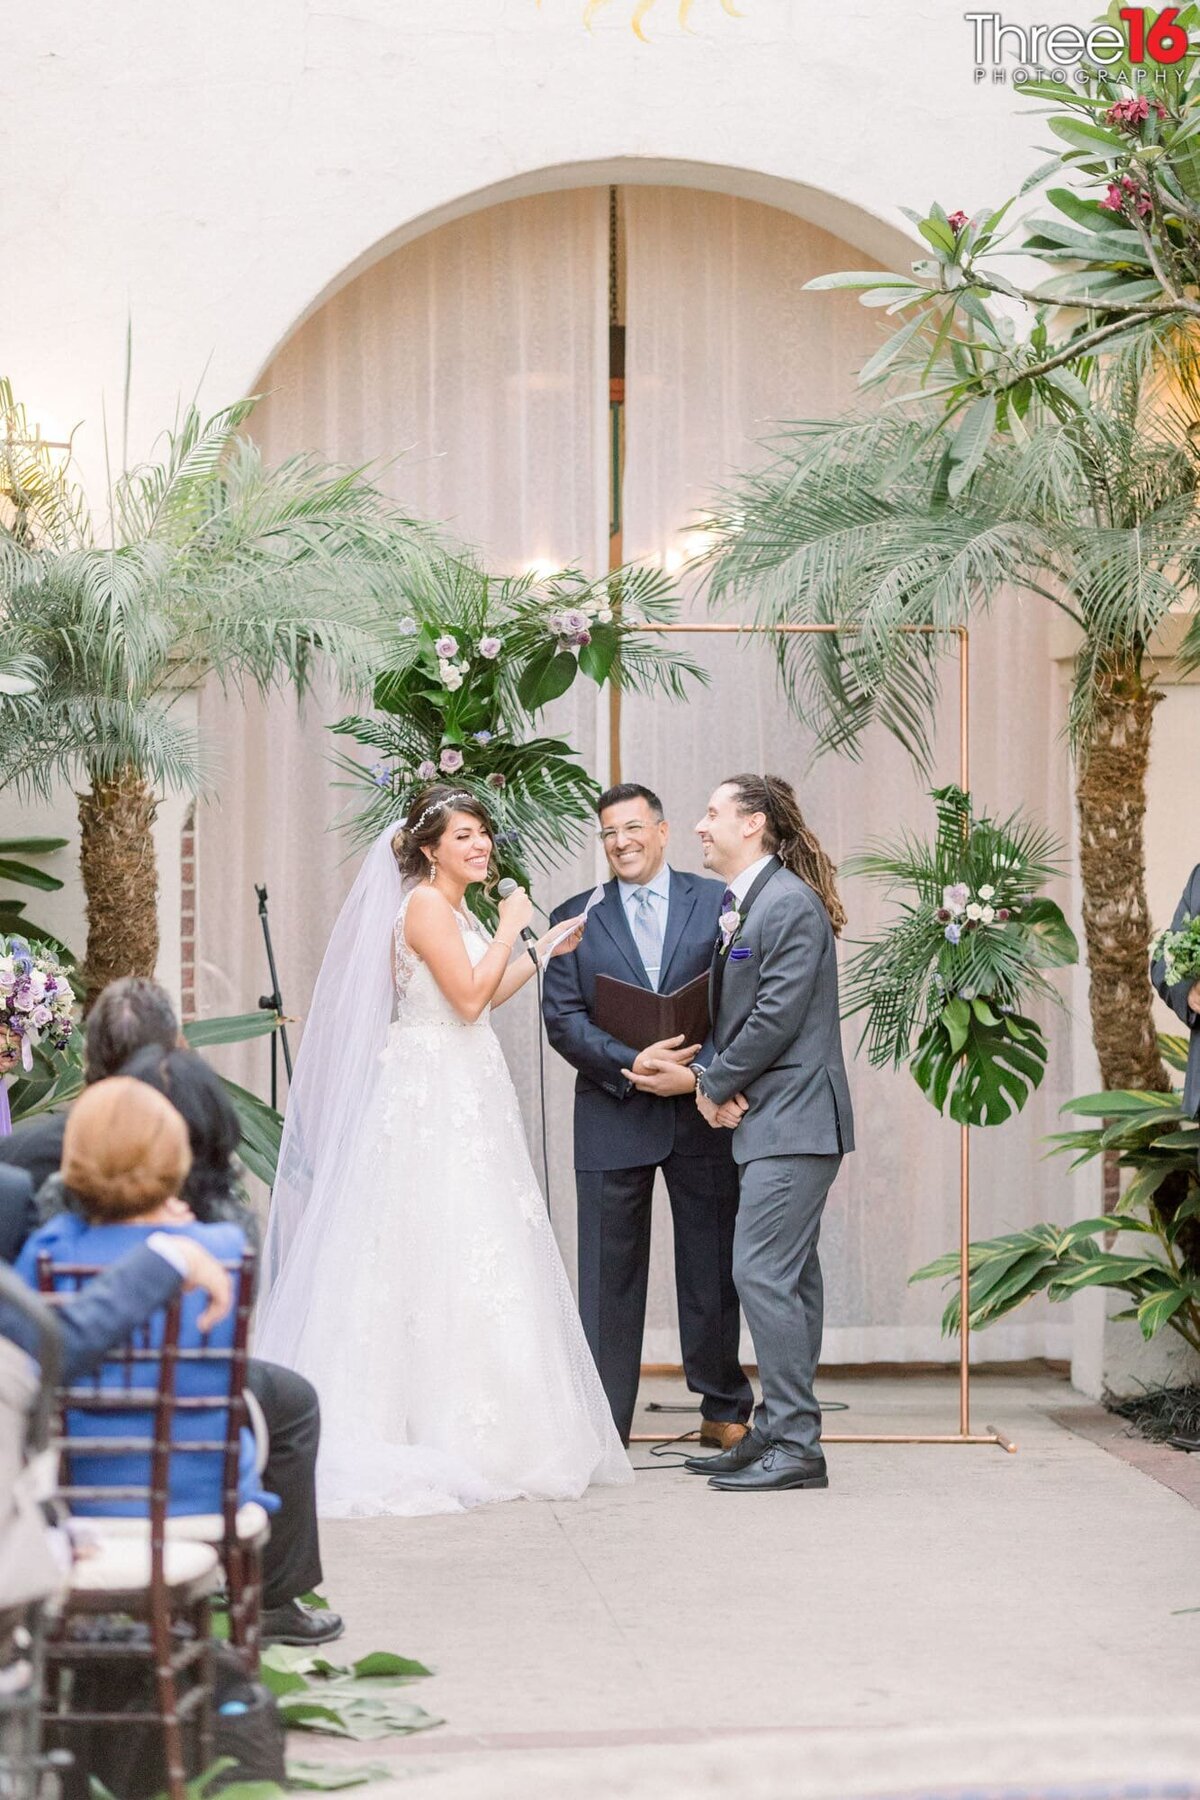 Bride, Groom and officiant start to laugh as she tries to read her vows to him